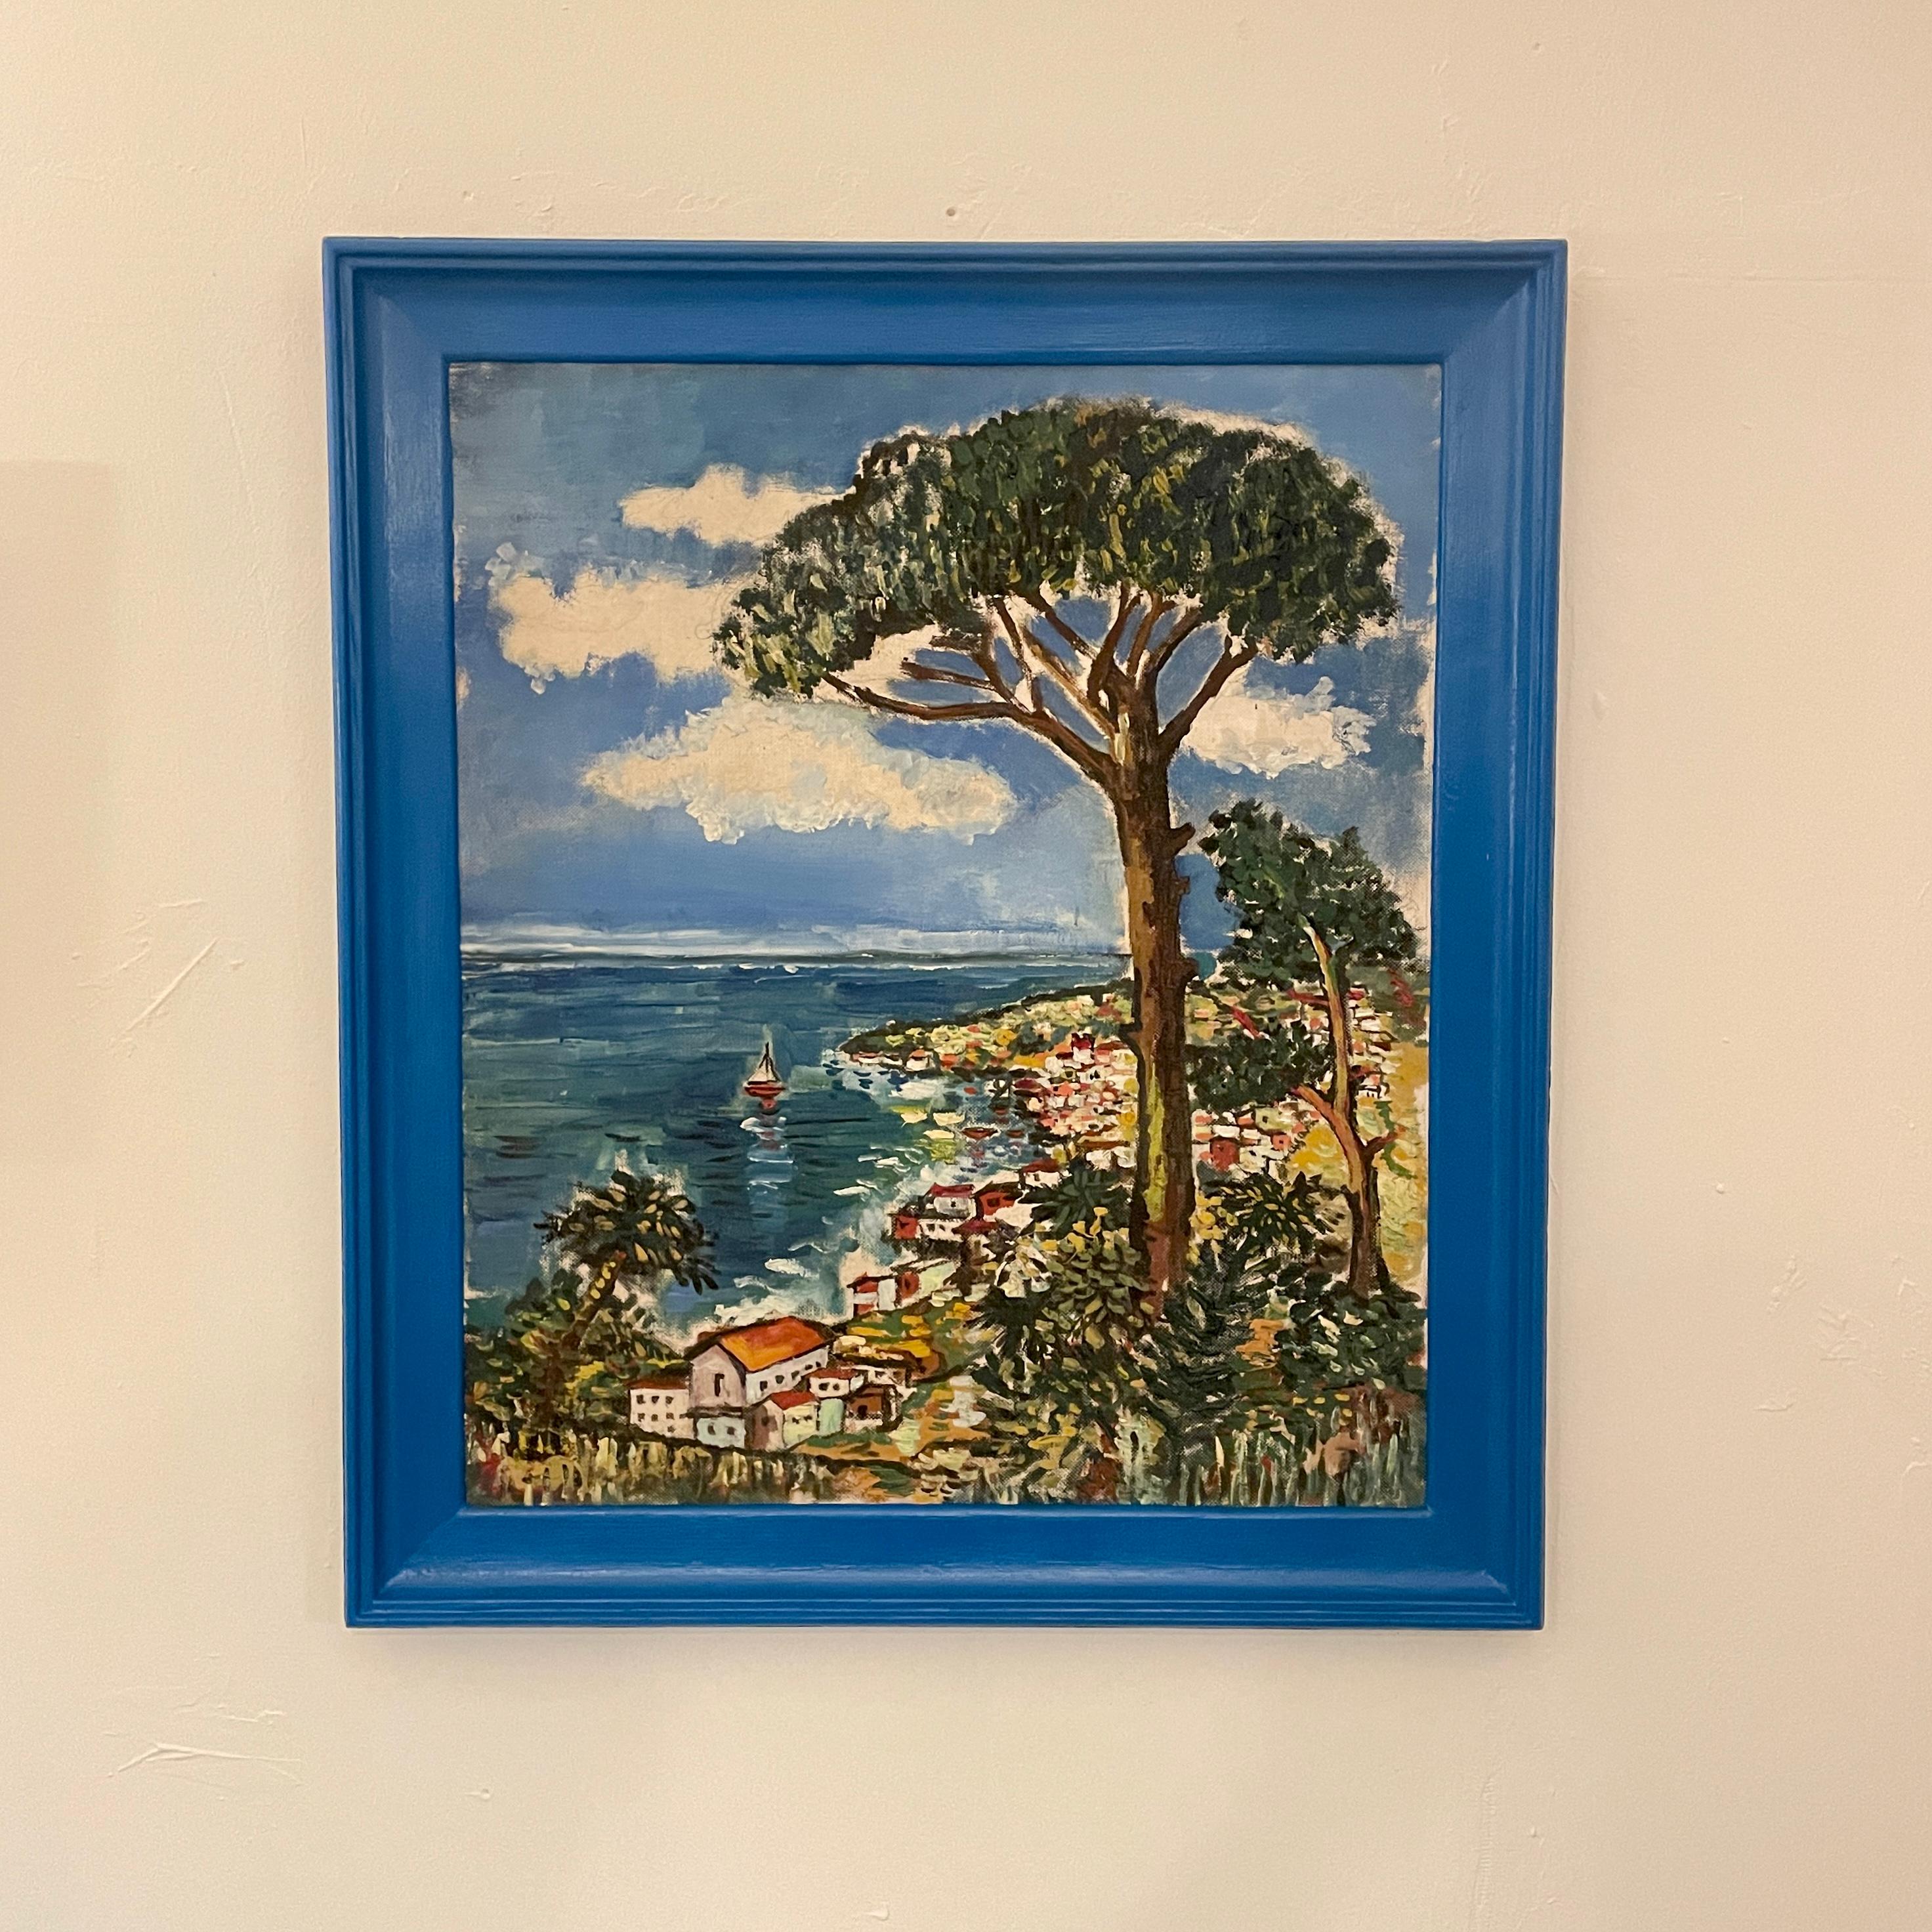 This fantastic mid century painting French of the Cote d'Azur in a Blue Frame, was painted around 1960.
It has a great look and you can instantly dive into that French summer feeling.
A unique piece which is a great eye-catcher for your antique,